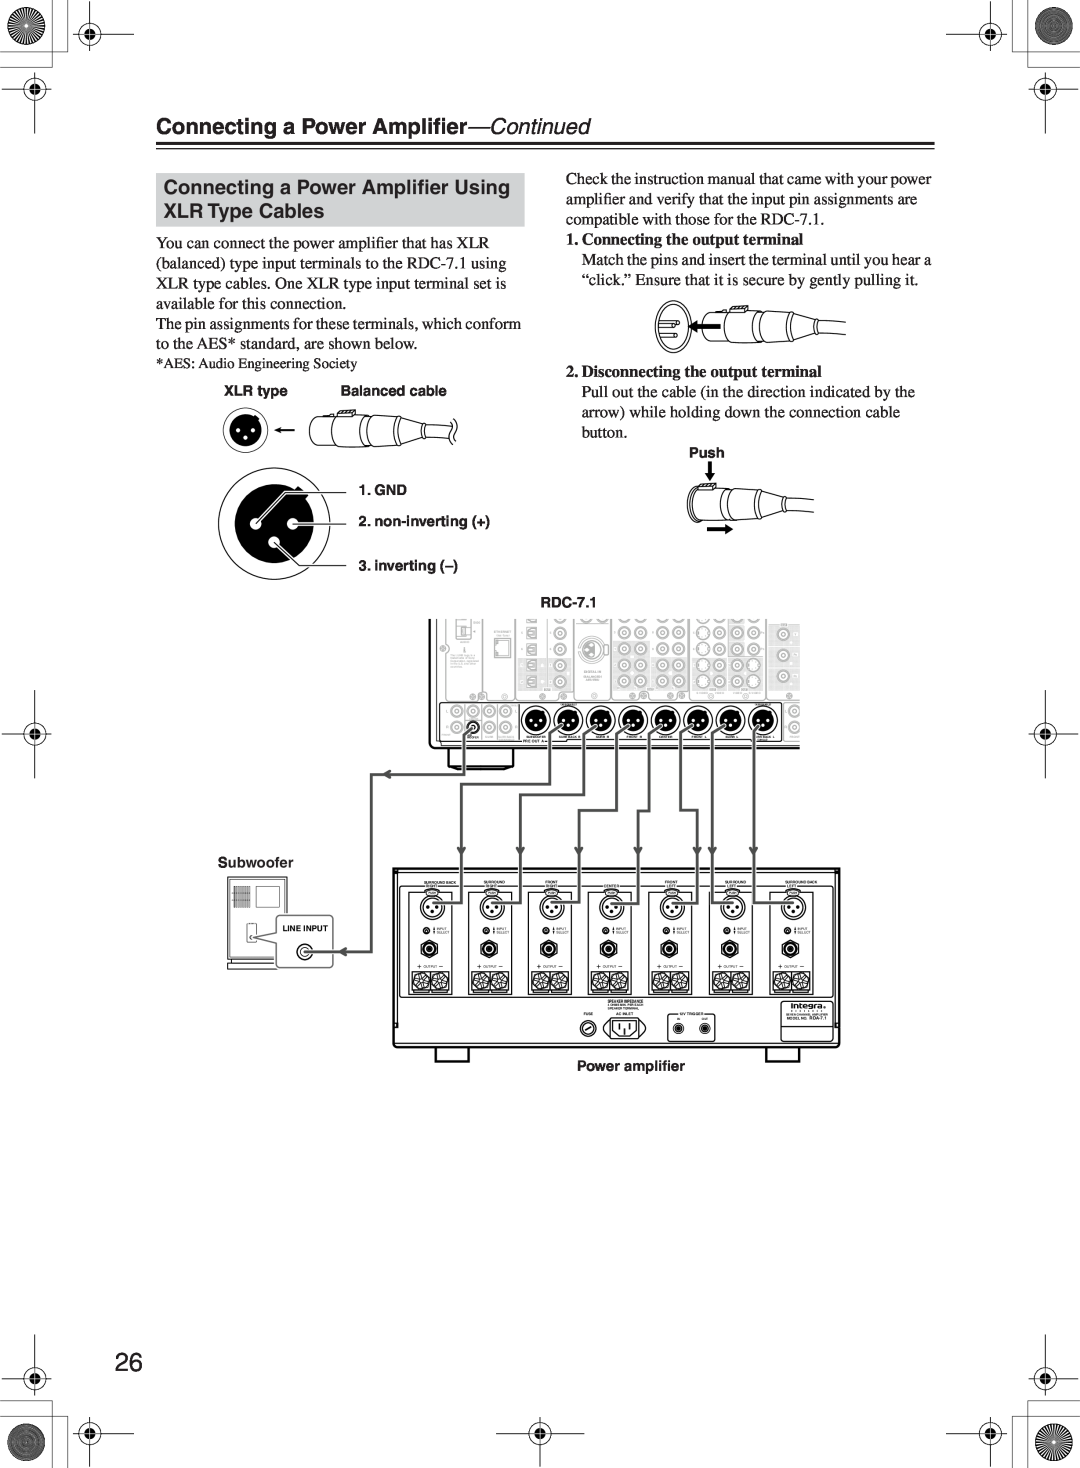 Integra RDC-7.1 instruction manual Connecting a Power Ampliﬁer-Continued, Connecting a Power Ampliﬁer Using XLR Type Cables 